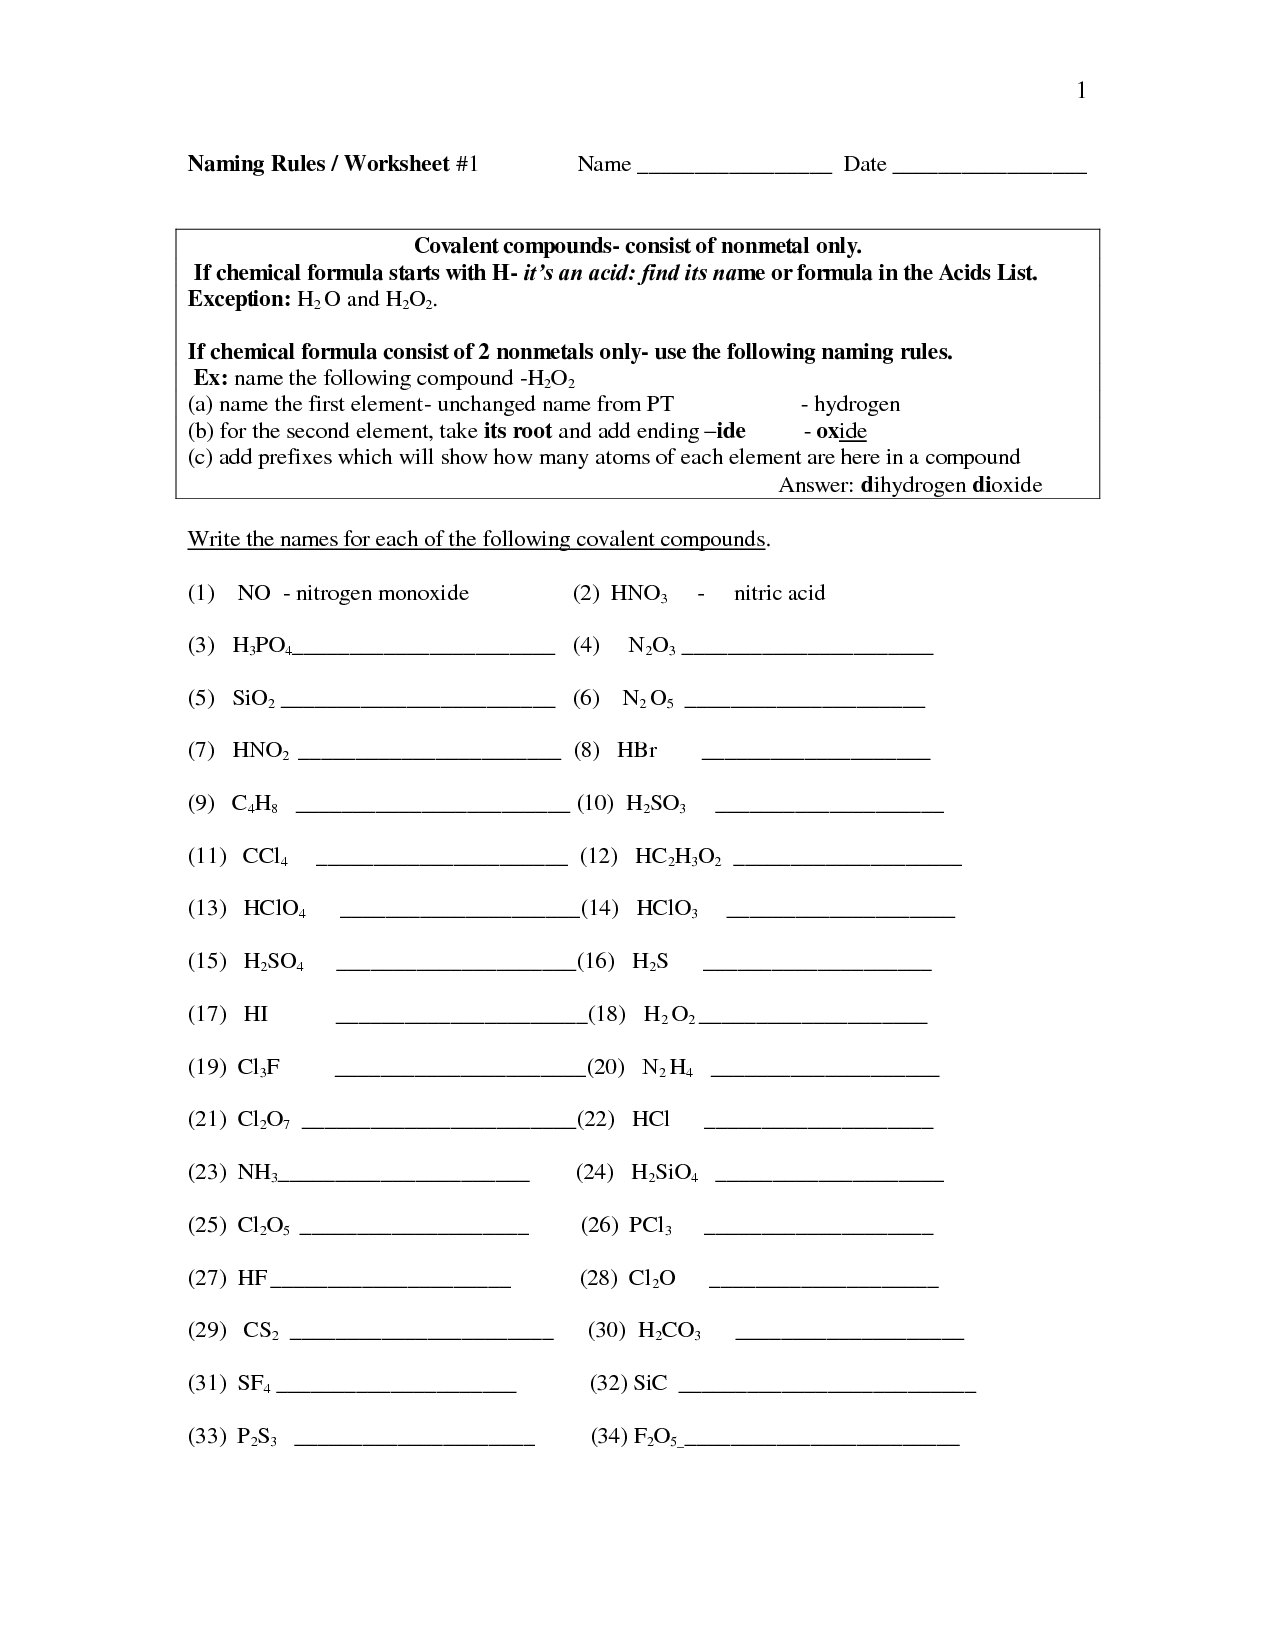 Naming And Writing Formulas For Covalent Compounds Worksheet Answer Key